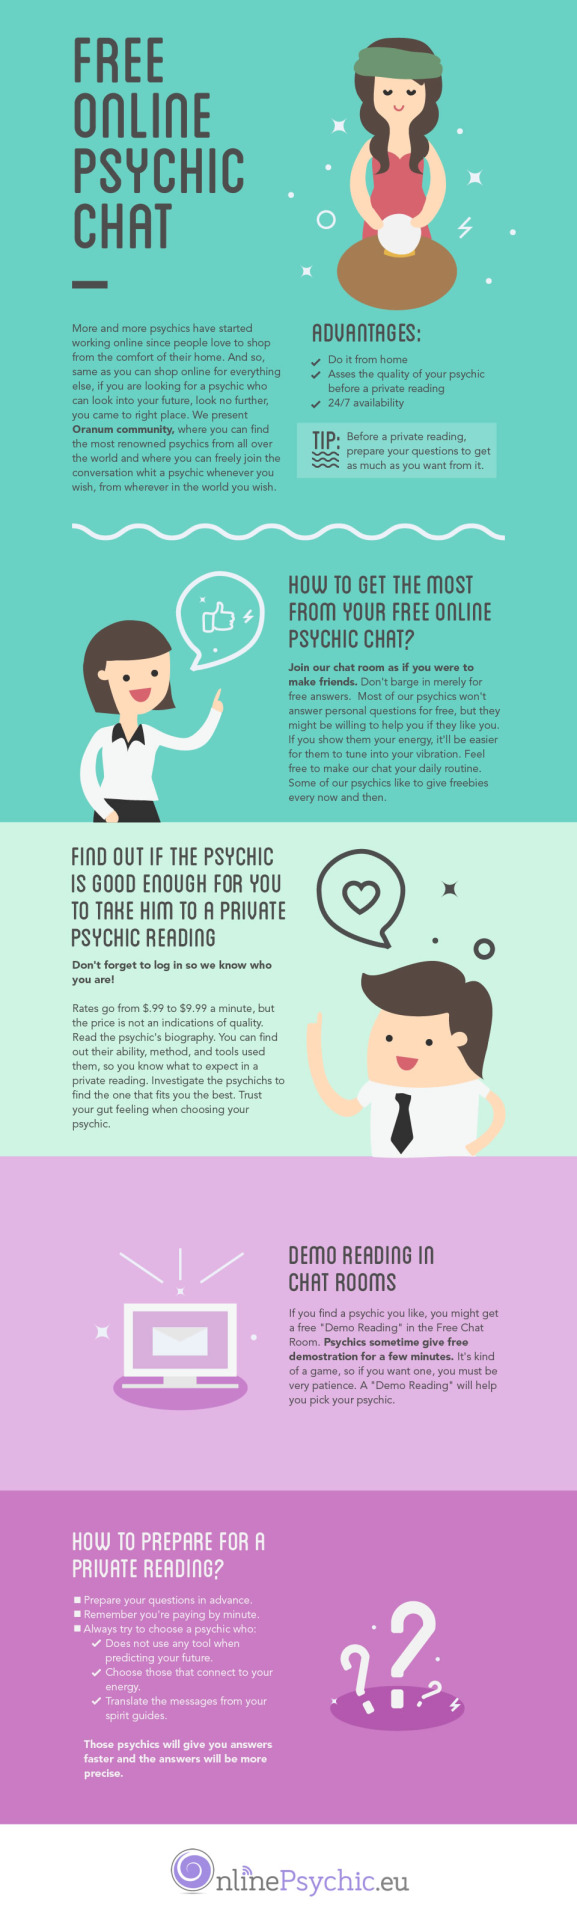 free-online-psychic-chat-infographic-plaza